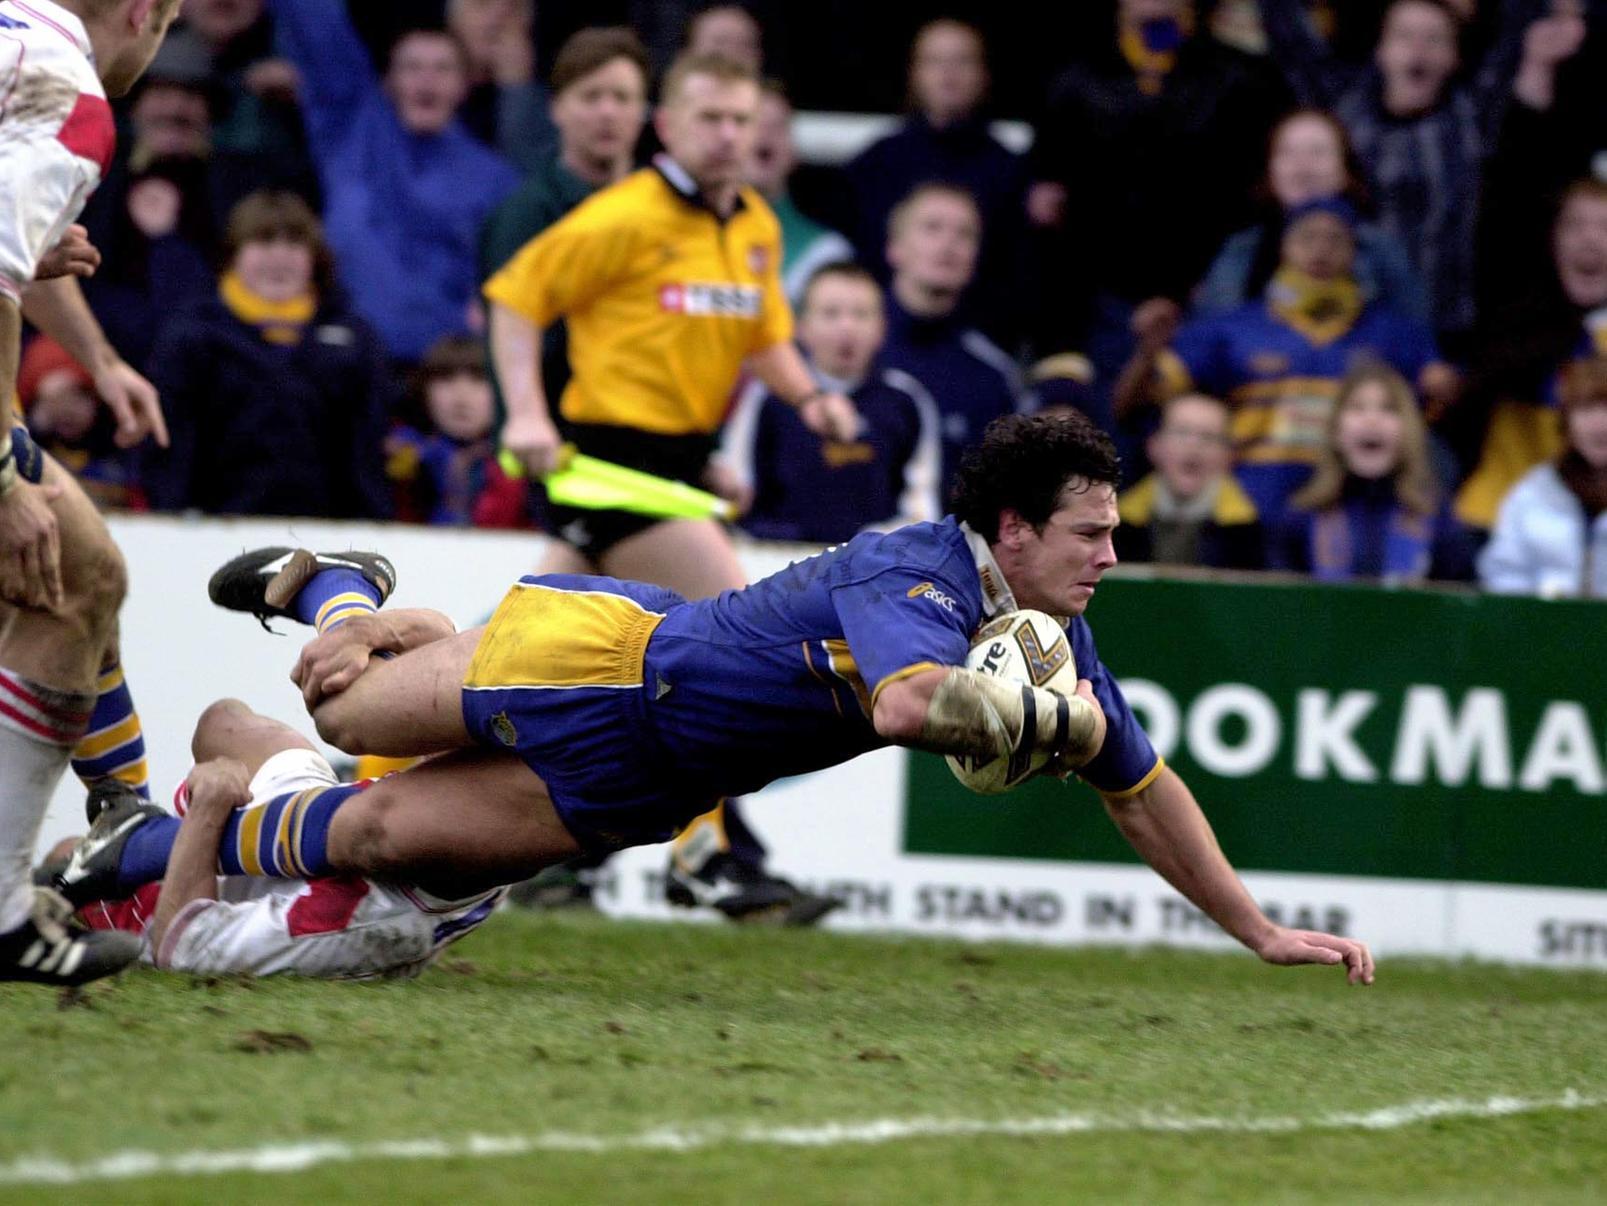 Adrian Morley goes over to score the winning try for Leeds Rhinos against St Helens in the fifth round of the Silk Cut Challenge Cup at Headingley.